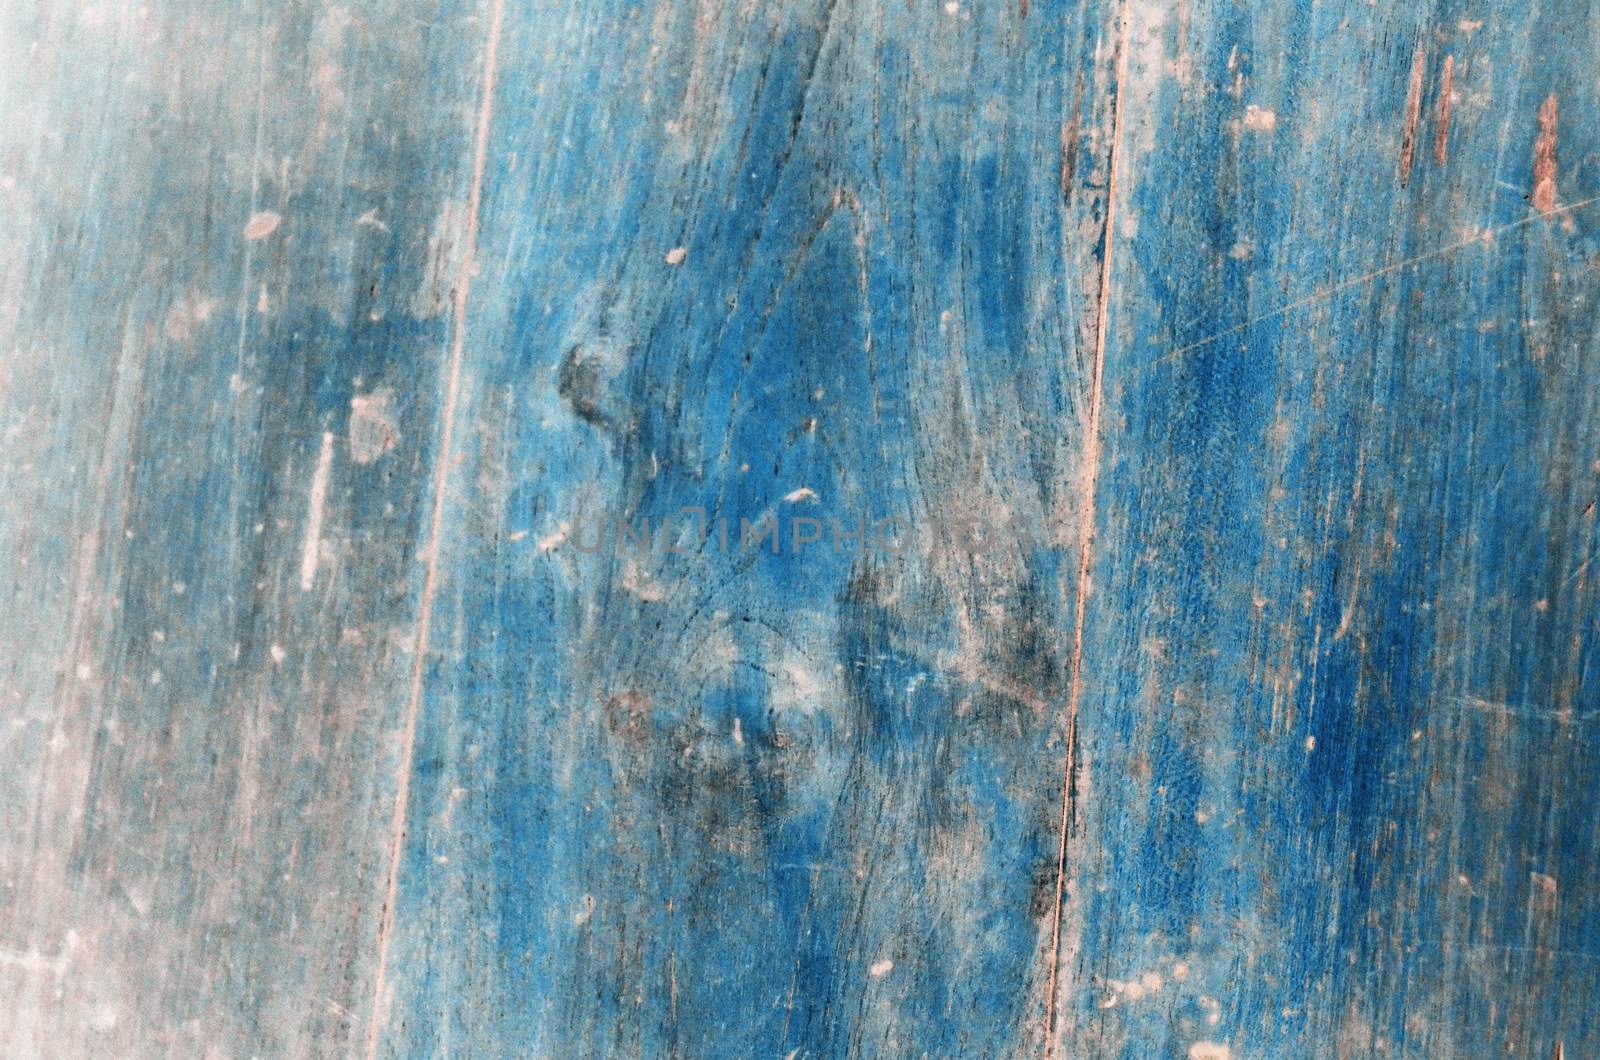 Abstract vintage grunge wooden background